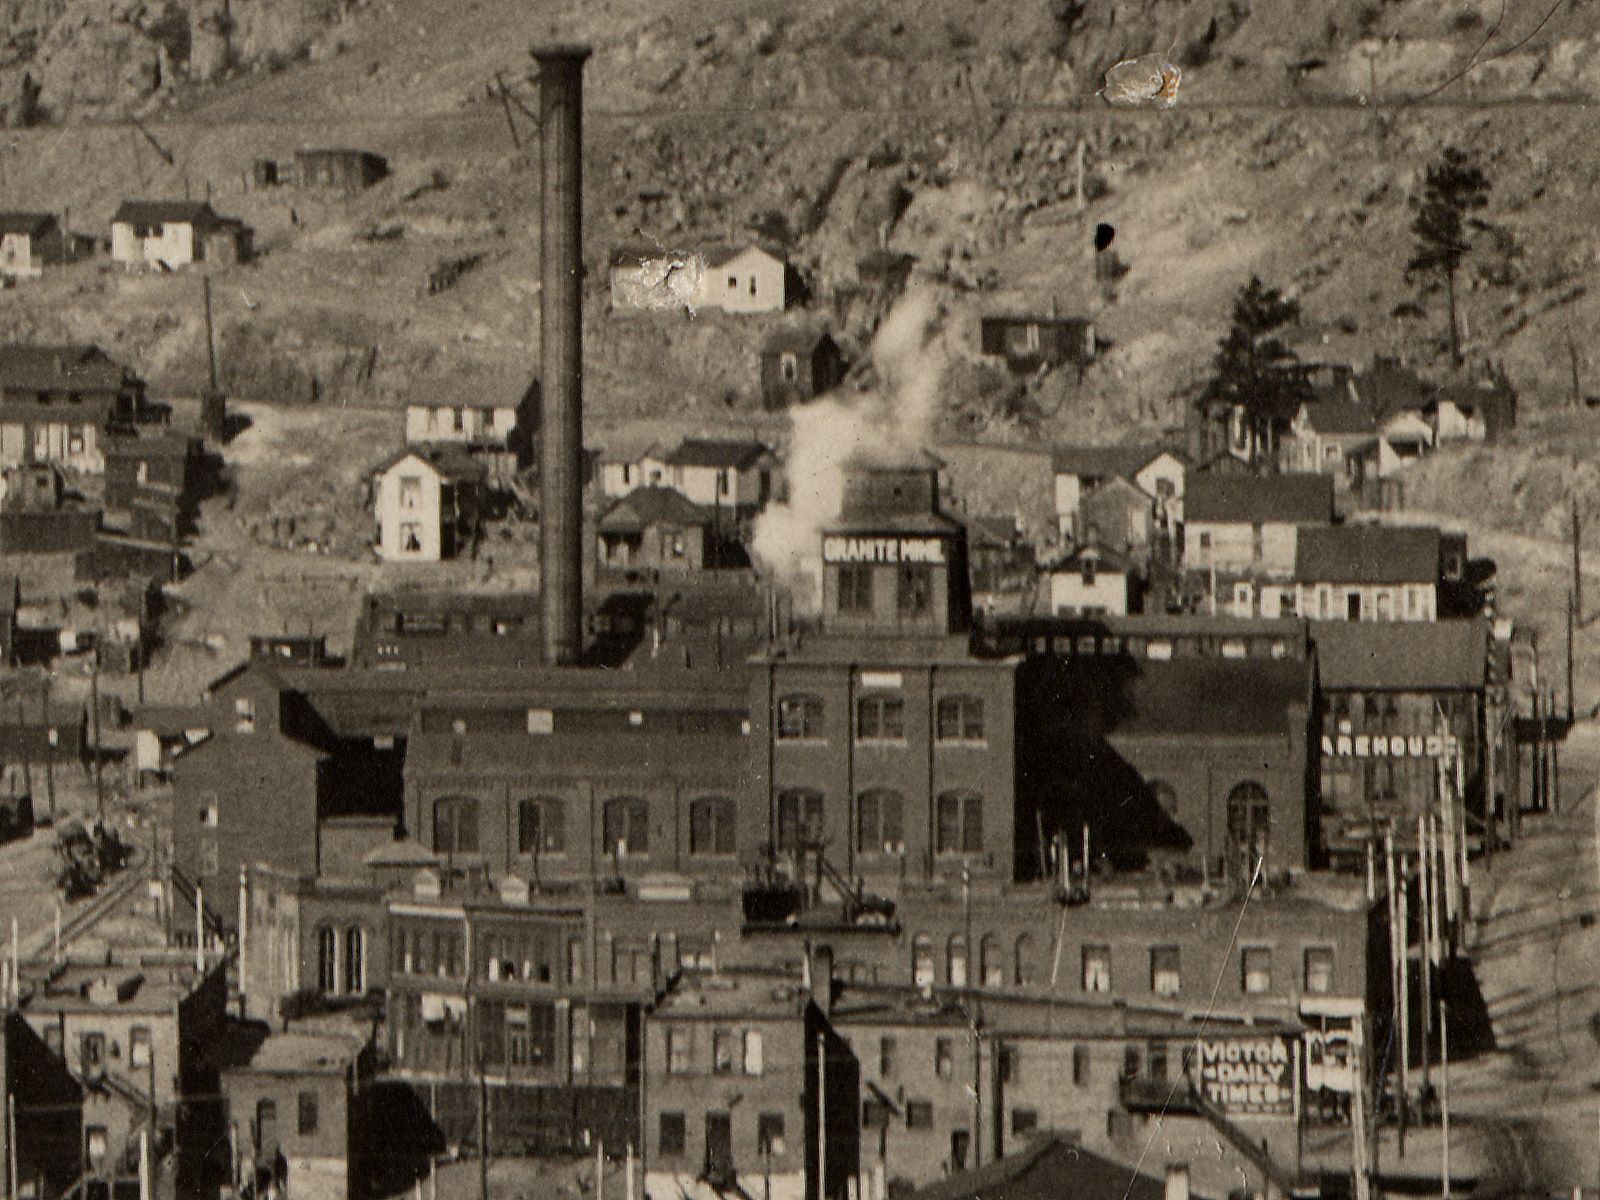 This view, cropped from a long-distance view, shows the eastern face of the Gold Coin Mine in Victor in all its glory, after it sold to the Granite Gold Mining Company, as it is now marked as being the Granite Mine. In early December of 1905 it was in mining journals published news that the Gold Coin had been sold, as part of a 13 acres' land deal, to the Granite company, who seems to have leased the property at least half a year before that time.
When looking at this image it is no wonder Victor was named City of Mines, as this is smack into the town, and no wonder they needed the Columbine-Victor tunnel to get rid of waste rock as there is no room left here for any dumps. In the background is two levels of Midland Terminal grade seen, the lower one is the spur down to its Victor station, and the upper one is the mainline, seen just behind the top of the chimney.